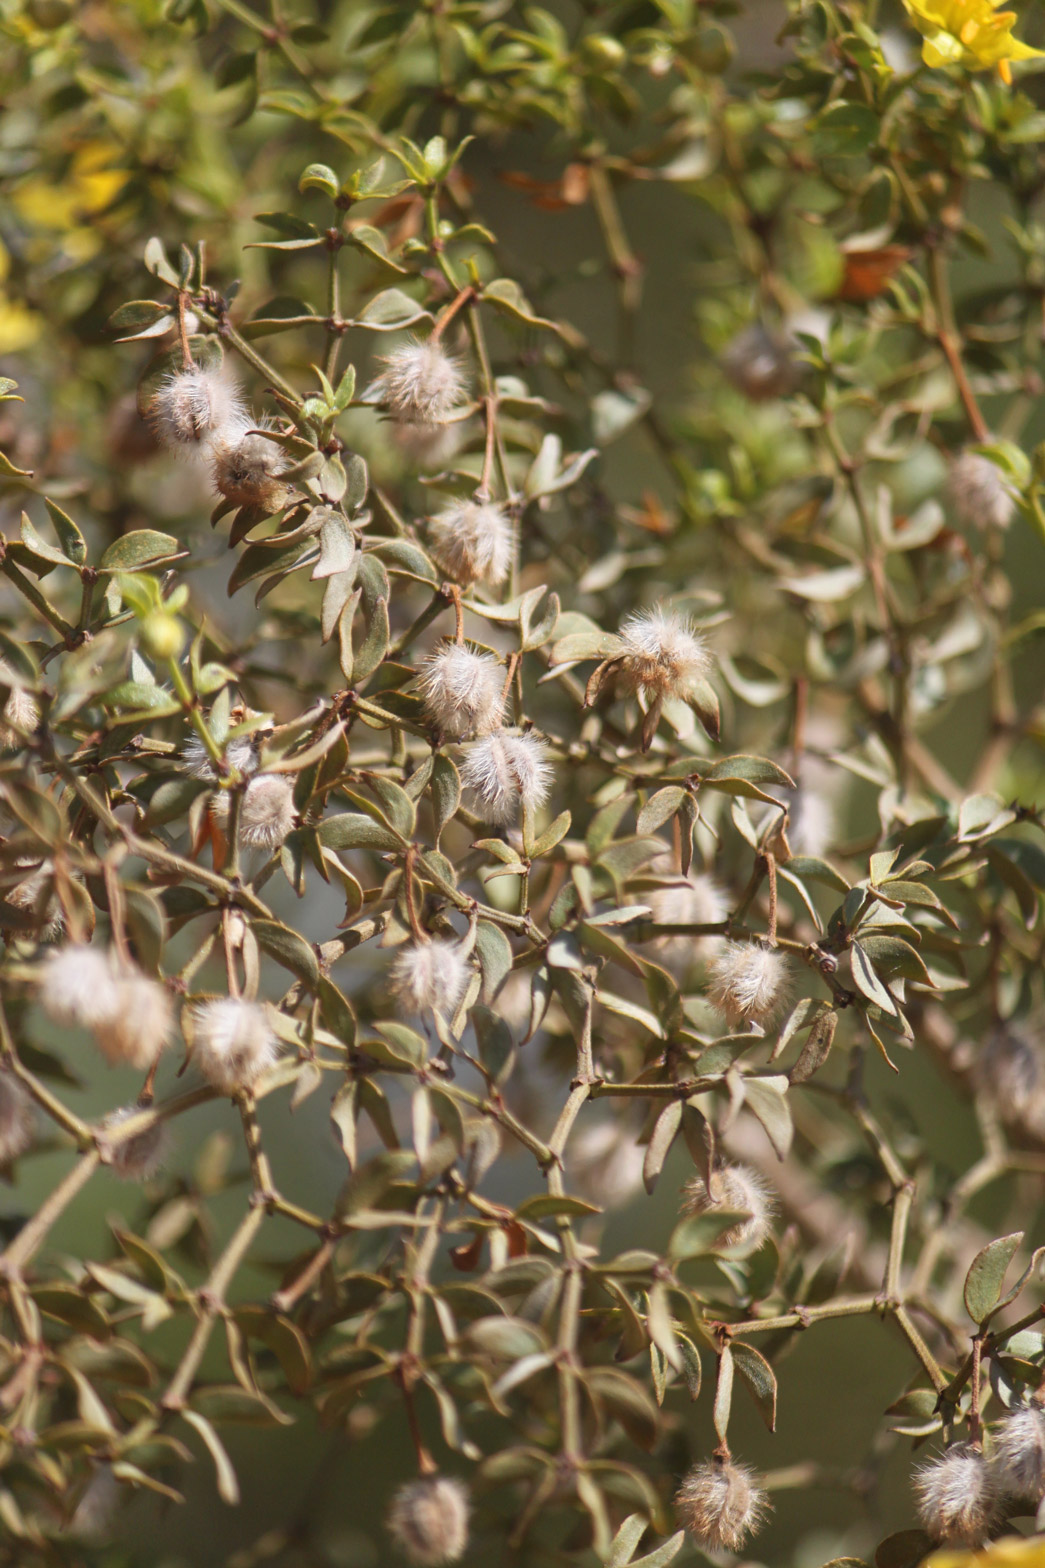 A close-up of the leaves of a Creosote bush.